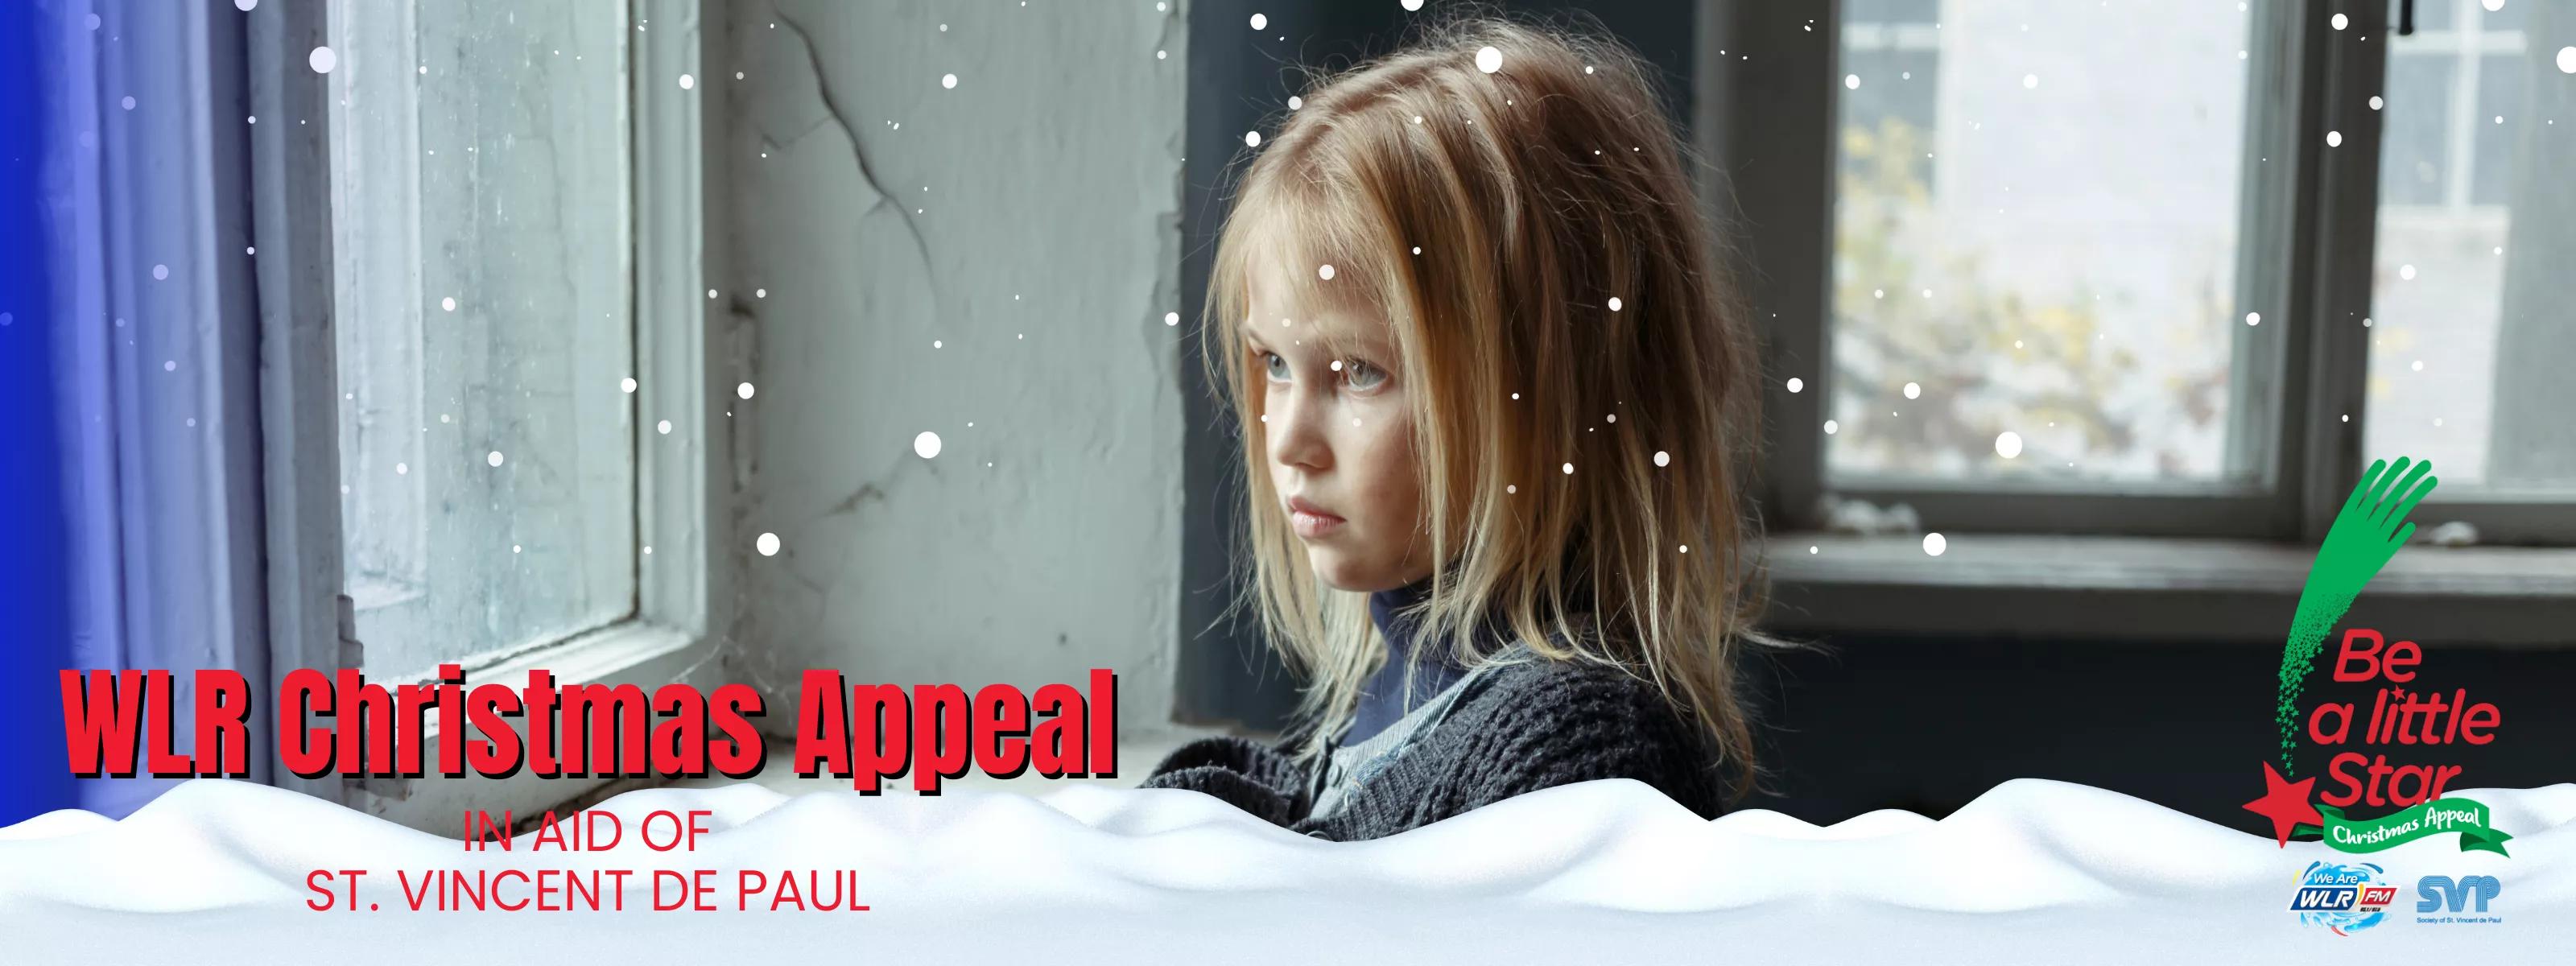 Appeal Banner 1000 x 750 px (3200 x 750 px)